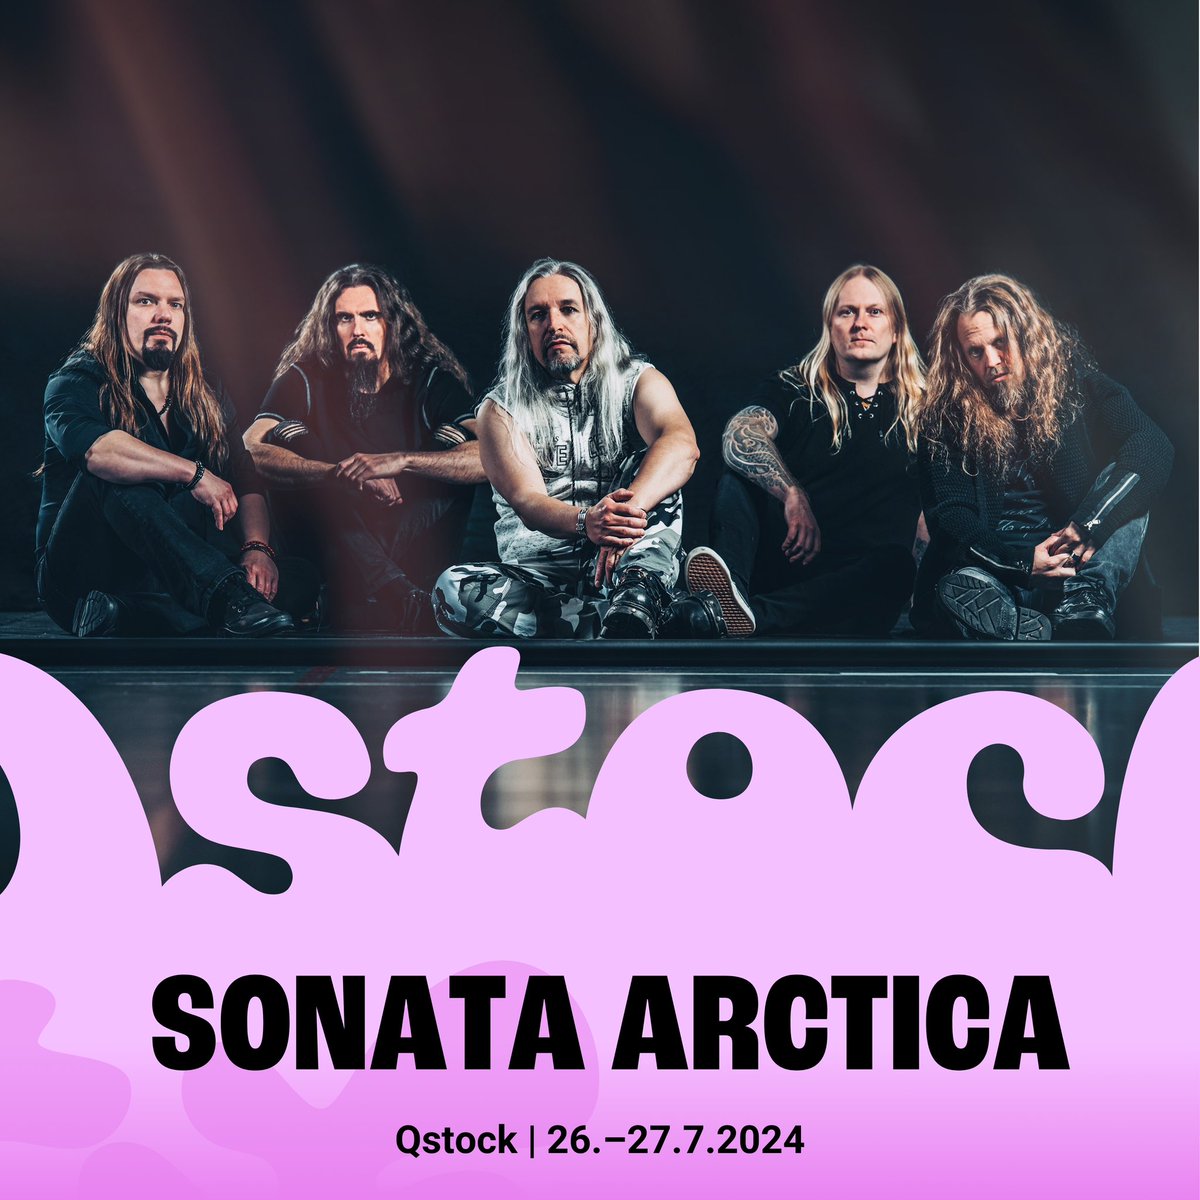 Qstock festival announced! Sonata Arctica to perform at Qstock festival, Oulu, Finland in July 2024. 🇫🇮 More info and tickets at: qstock.fi/en/ Check all tour dates at: sonataarctica.info/tour